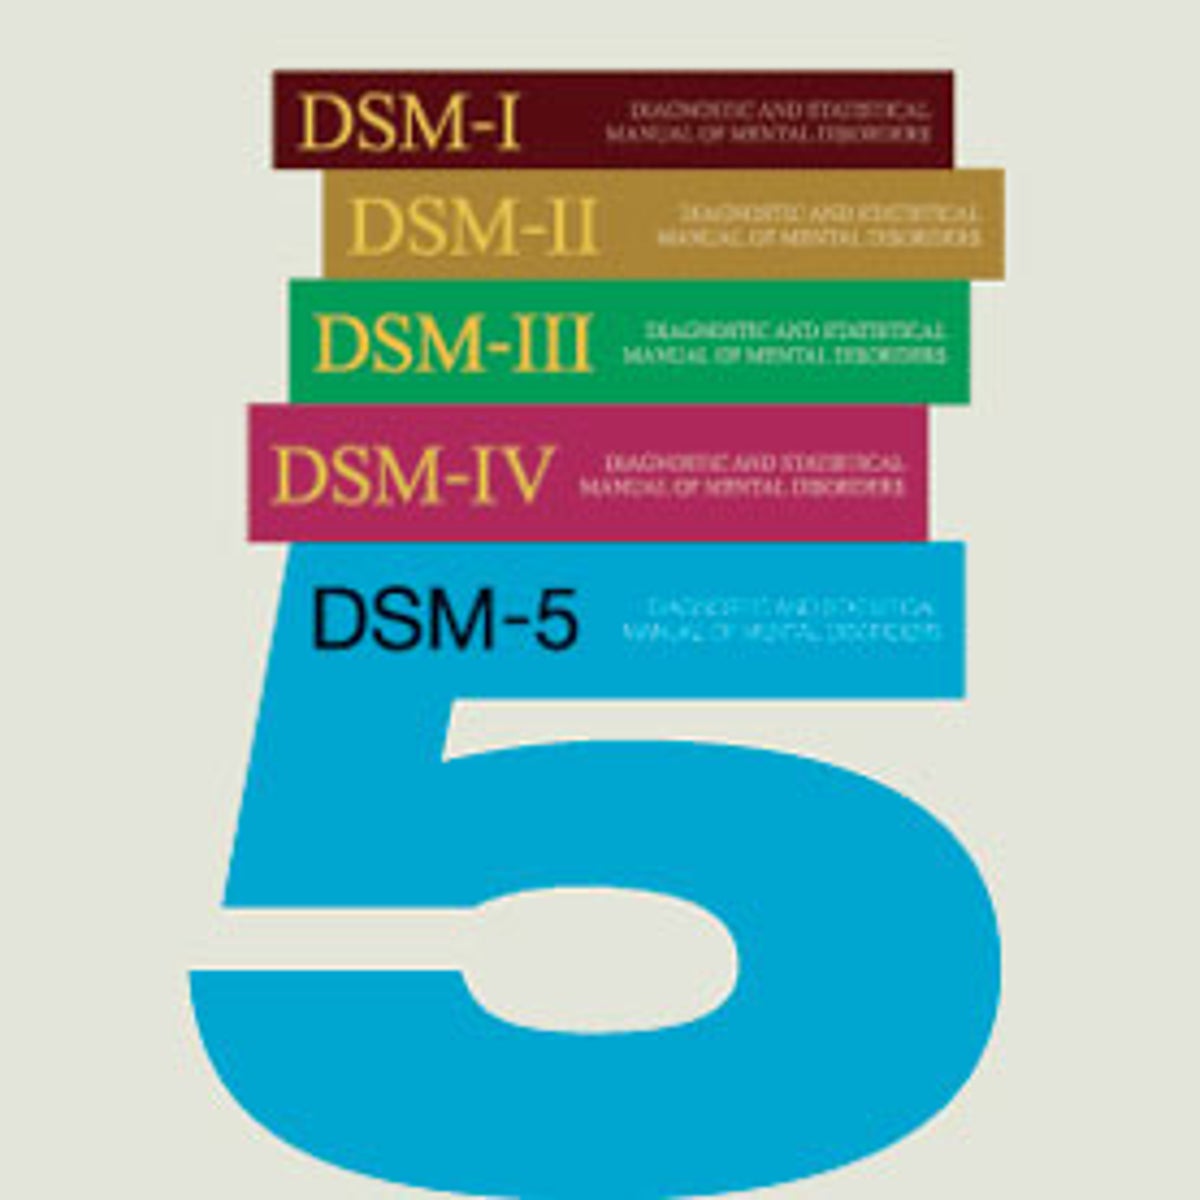 New Blogs Posts and a new DSM-5-TR